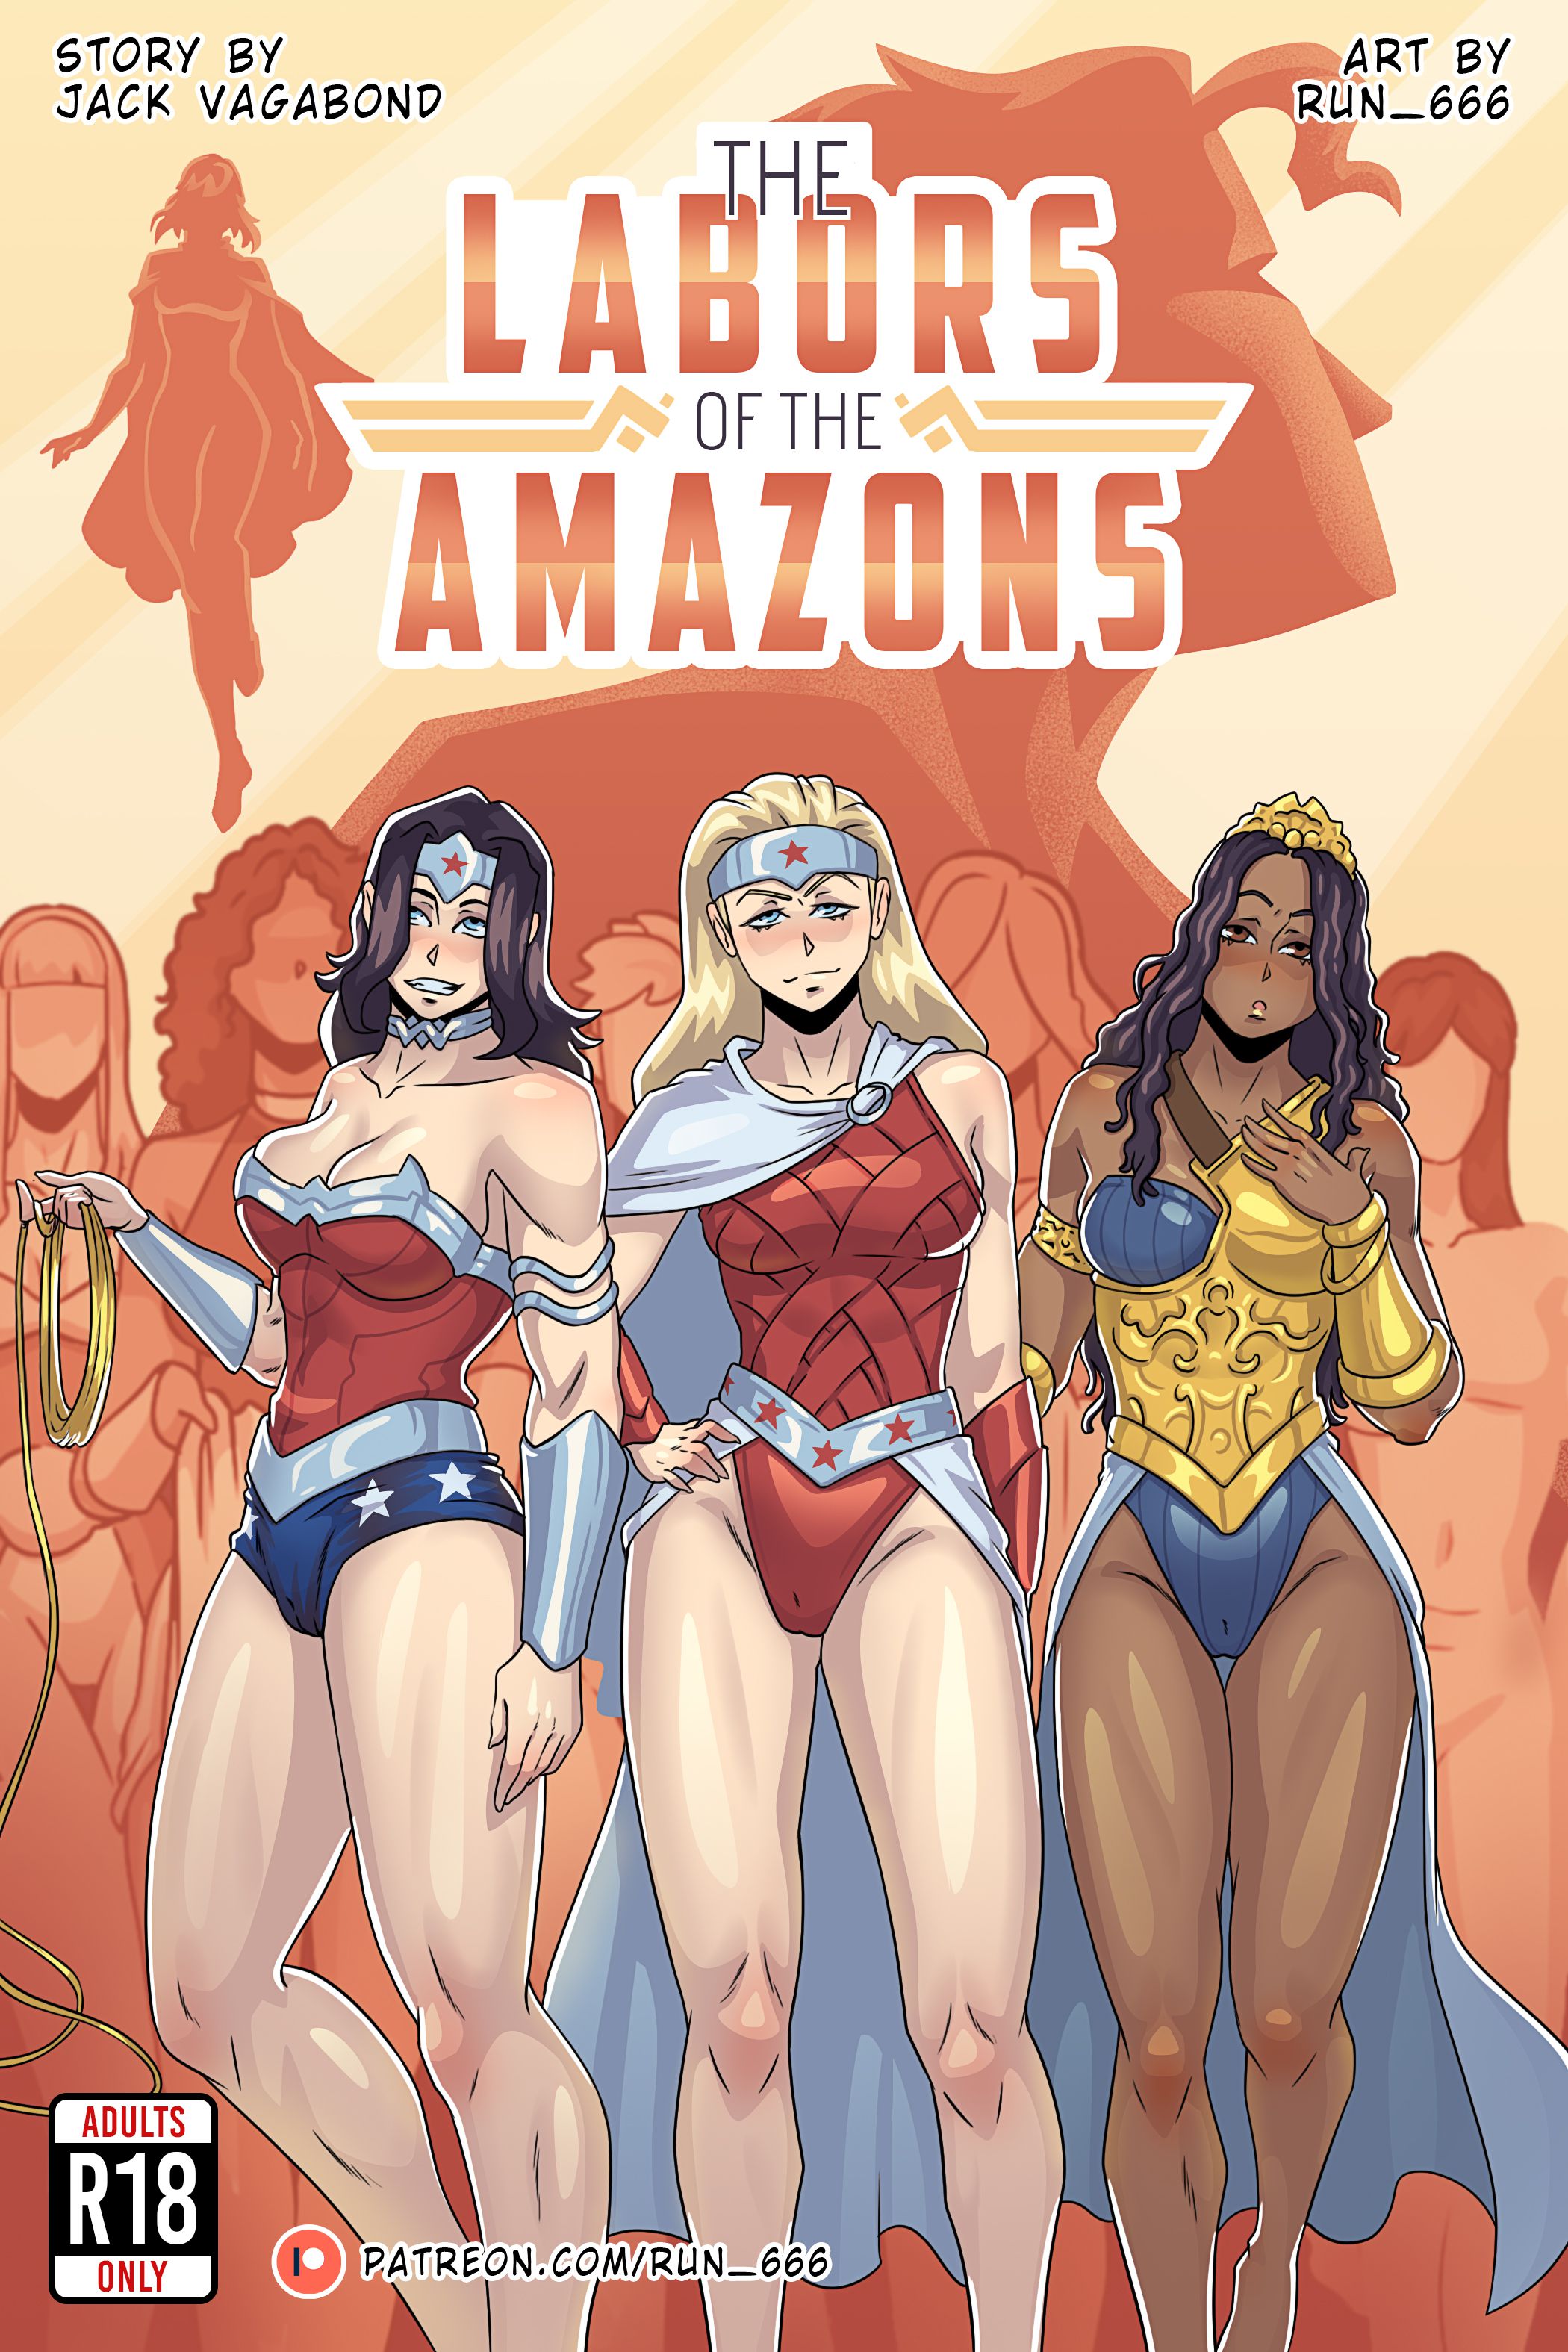 The Labors of the Amazons (Wonder Woman) Run 666 - 1  picture